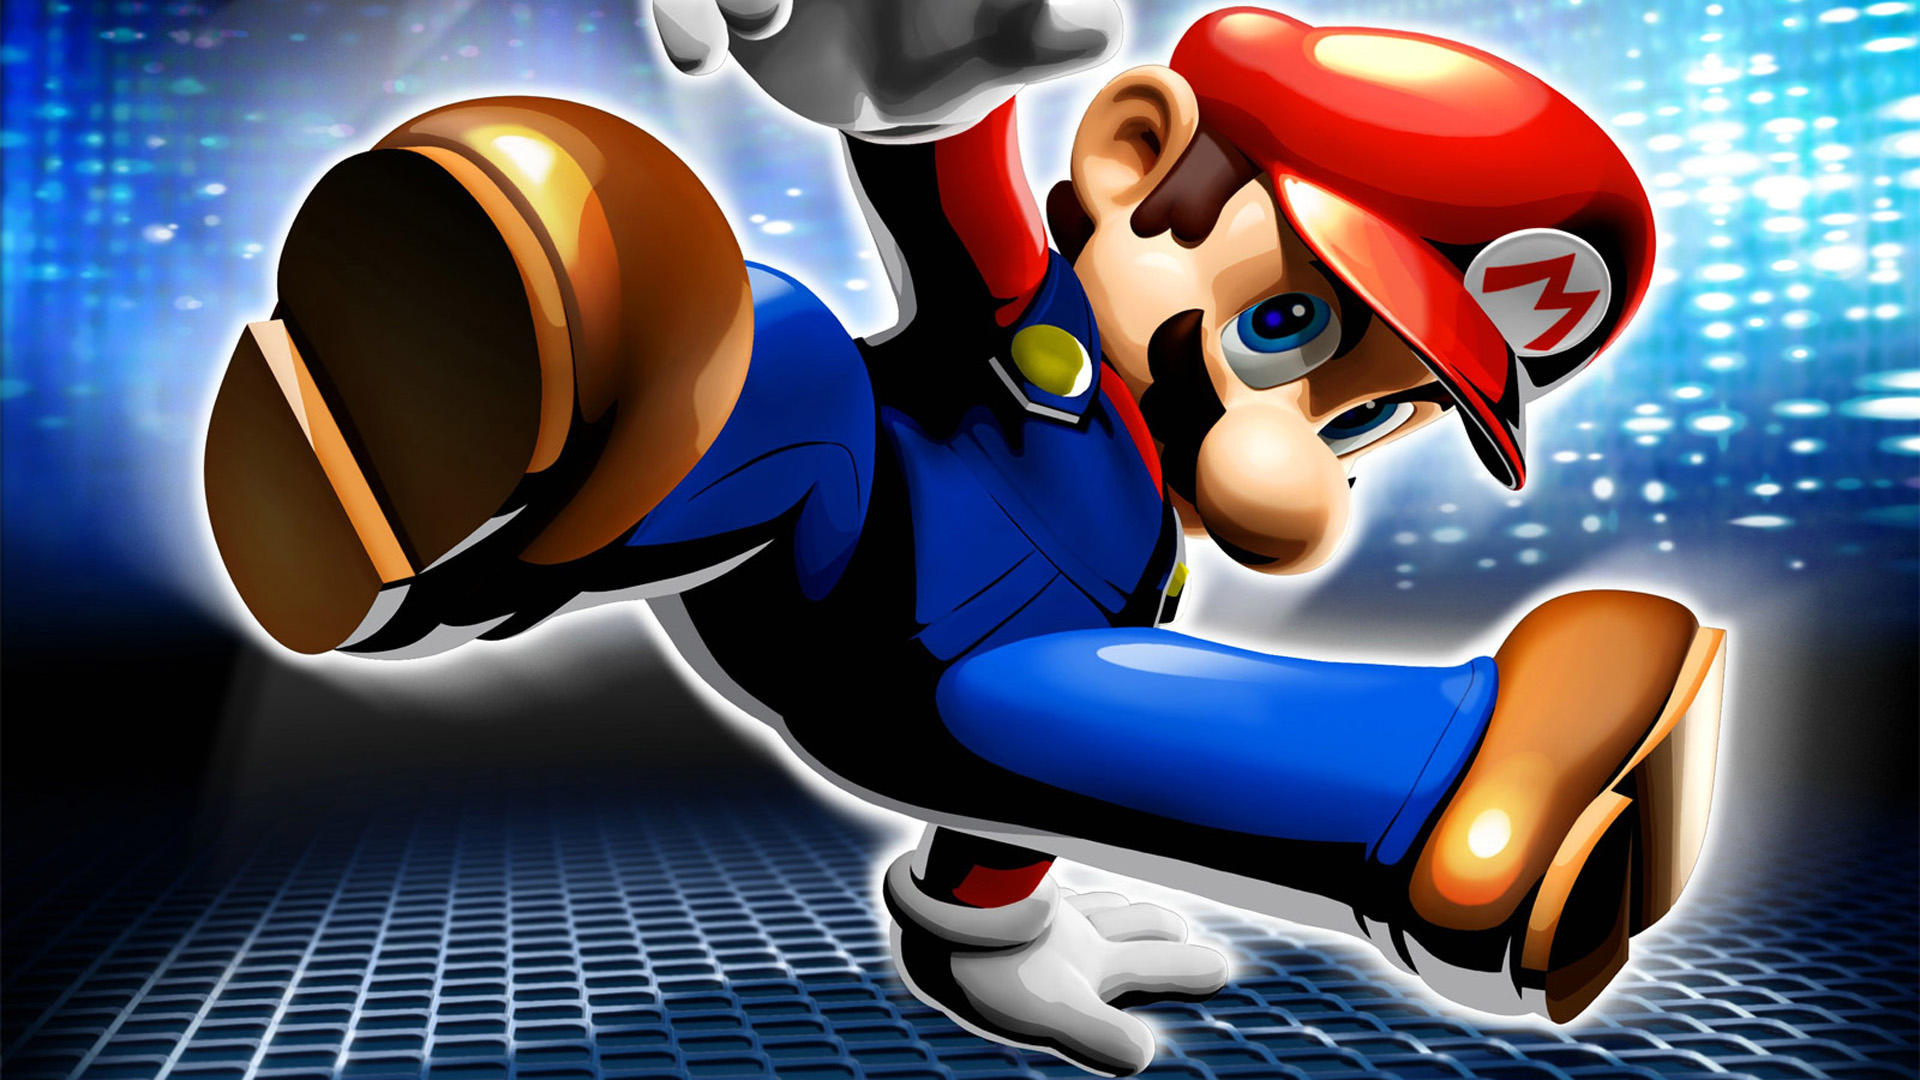 1920x1080 Super Mario 64 HD Wallpapers and Backgrounds